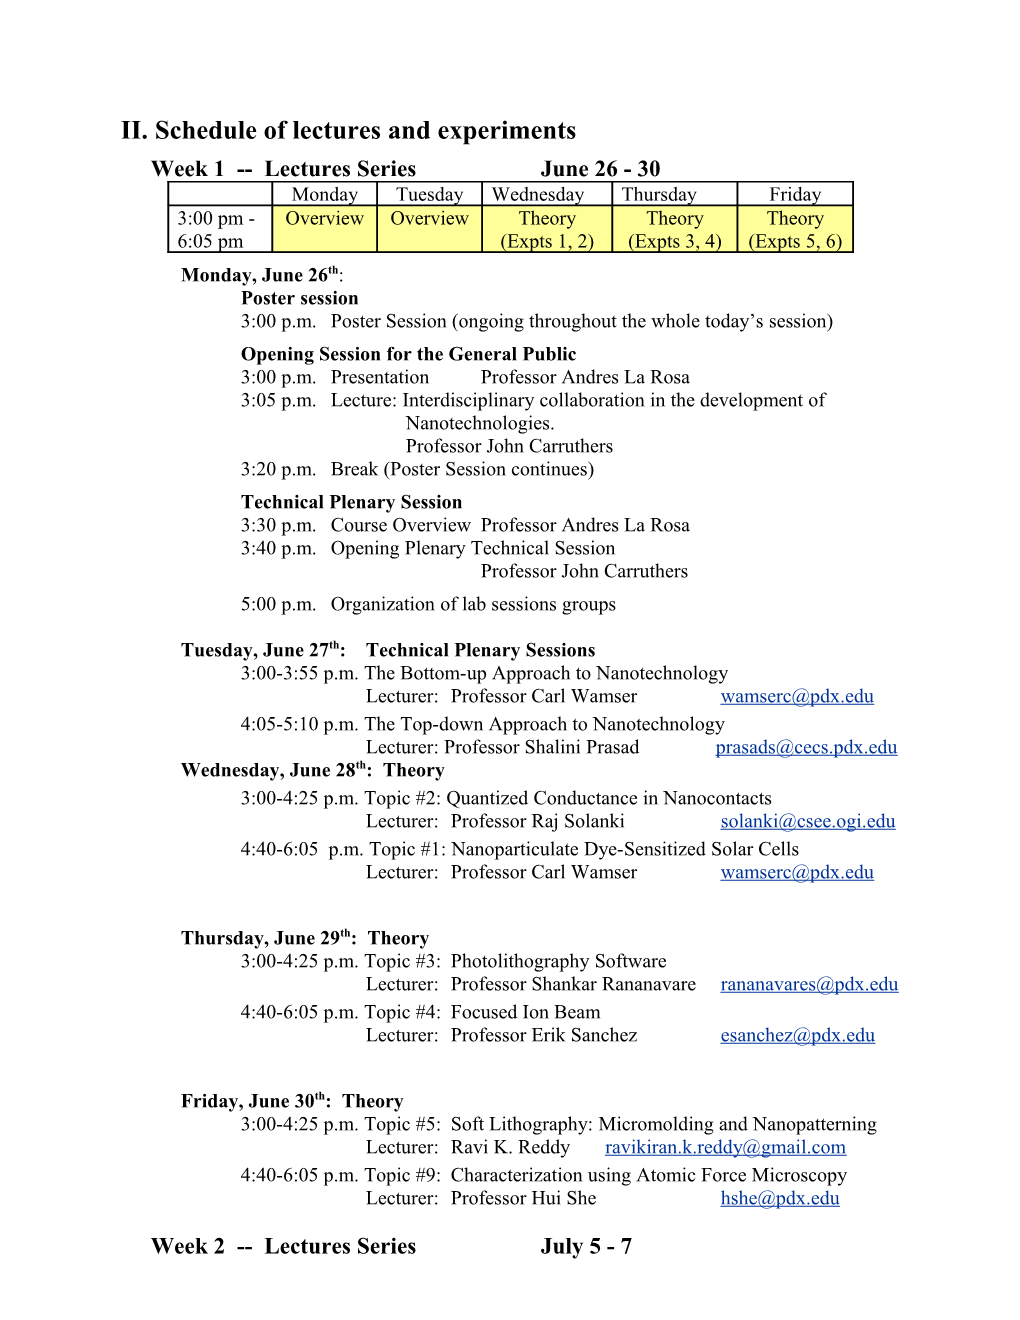 II. Schedule of Lectures and Experiments